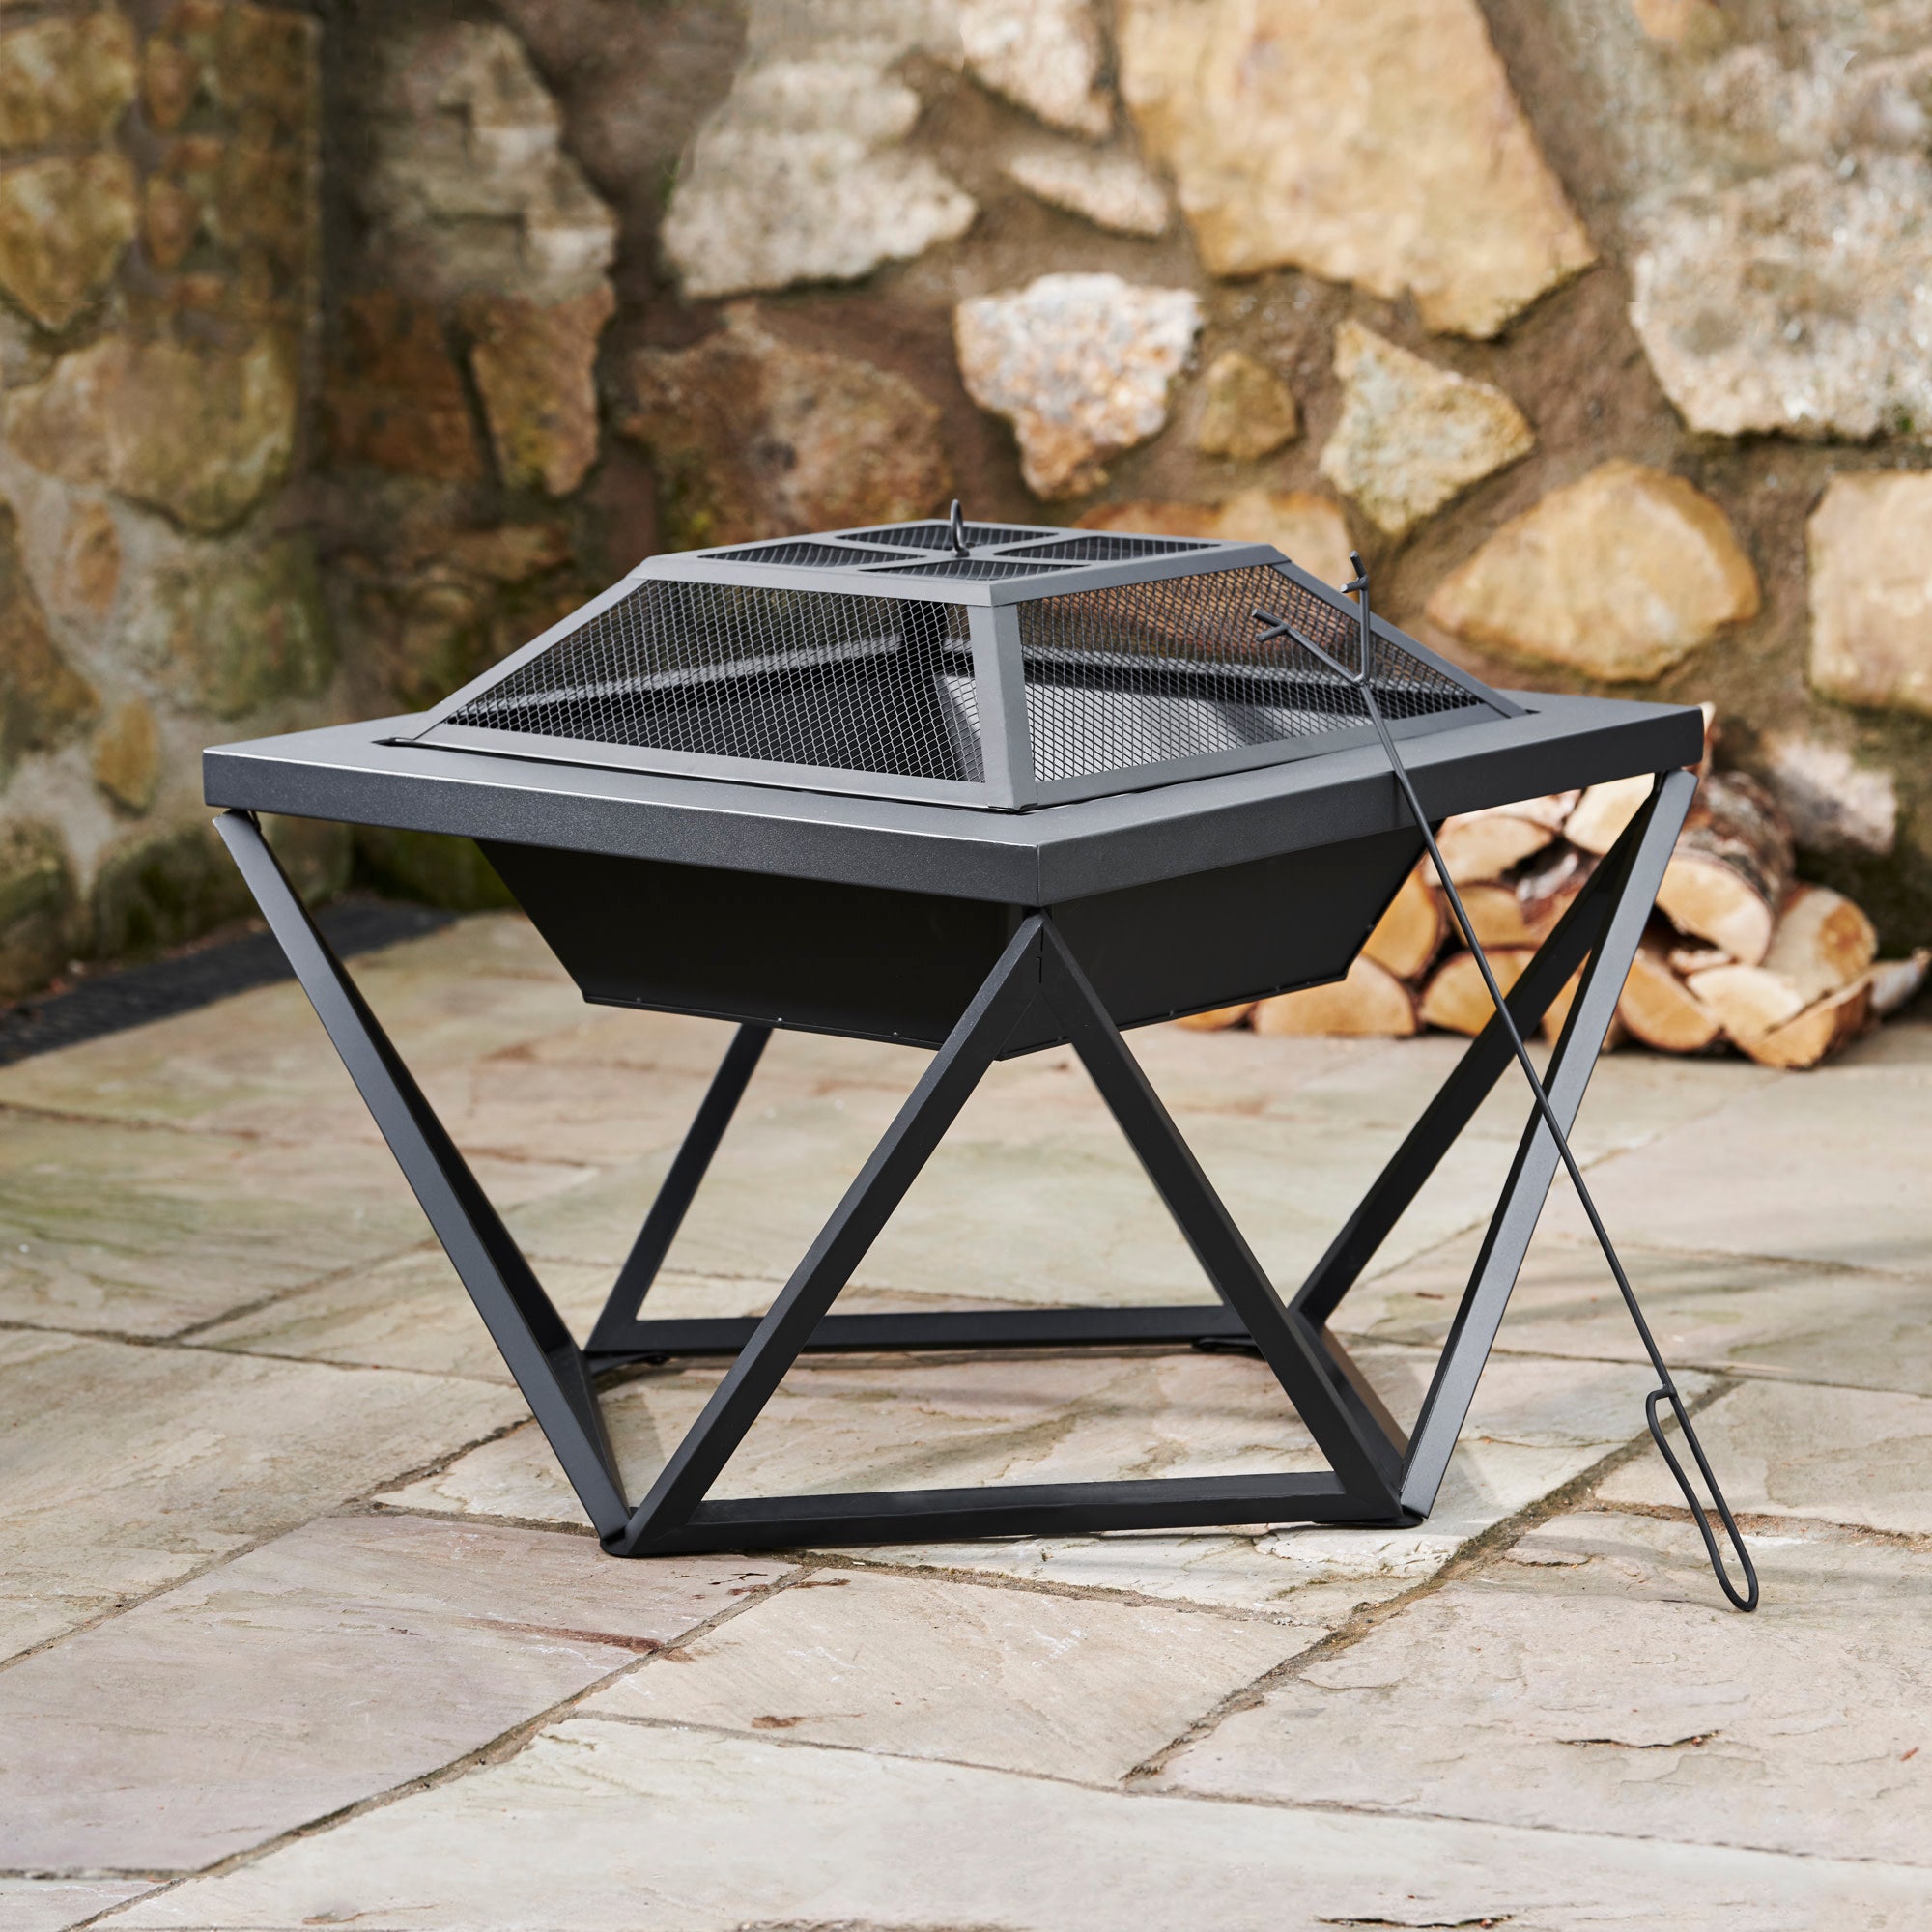 Teamson Home Outdoor 24" Wood Burning Fire Pit with Tabletop and Decorative Base, Black